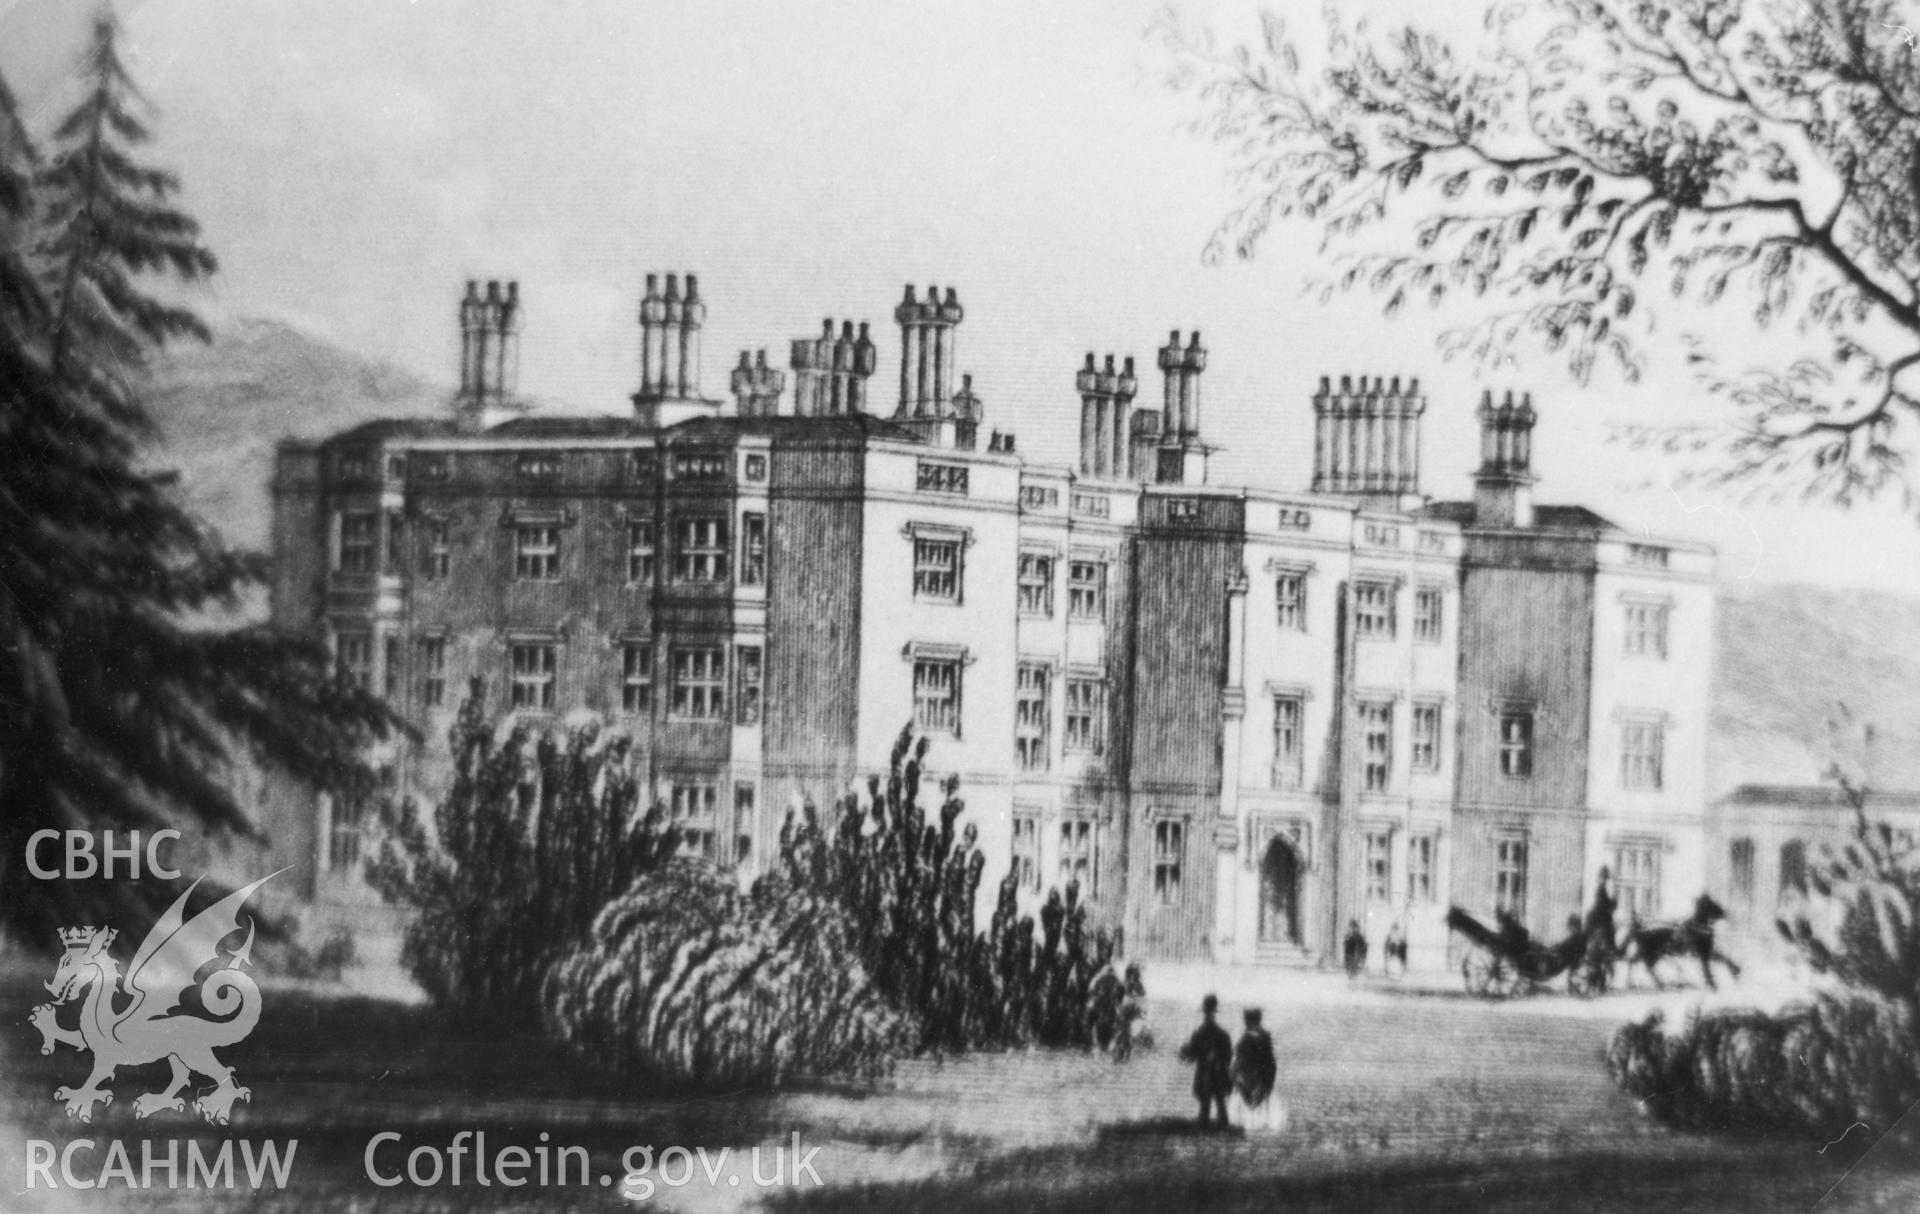 Copy of black and white image of Llanover House, Llanover, Monmouthshire, copied from early undated illustration showing exterior, loaned by Thomas Lloyd.